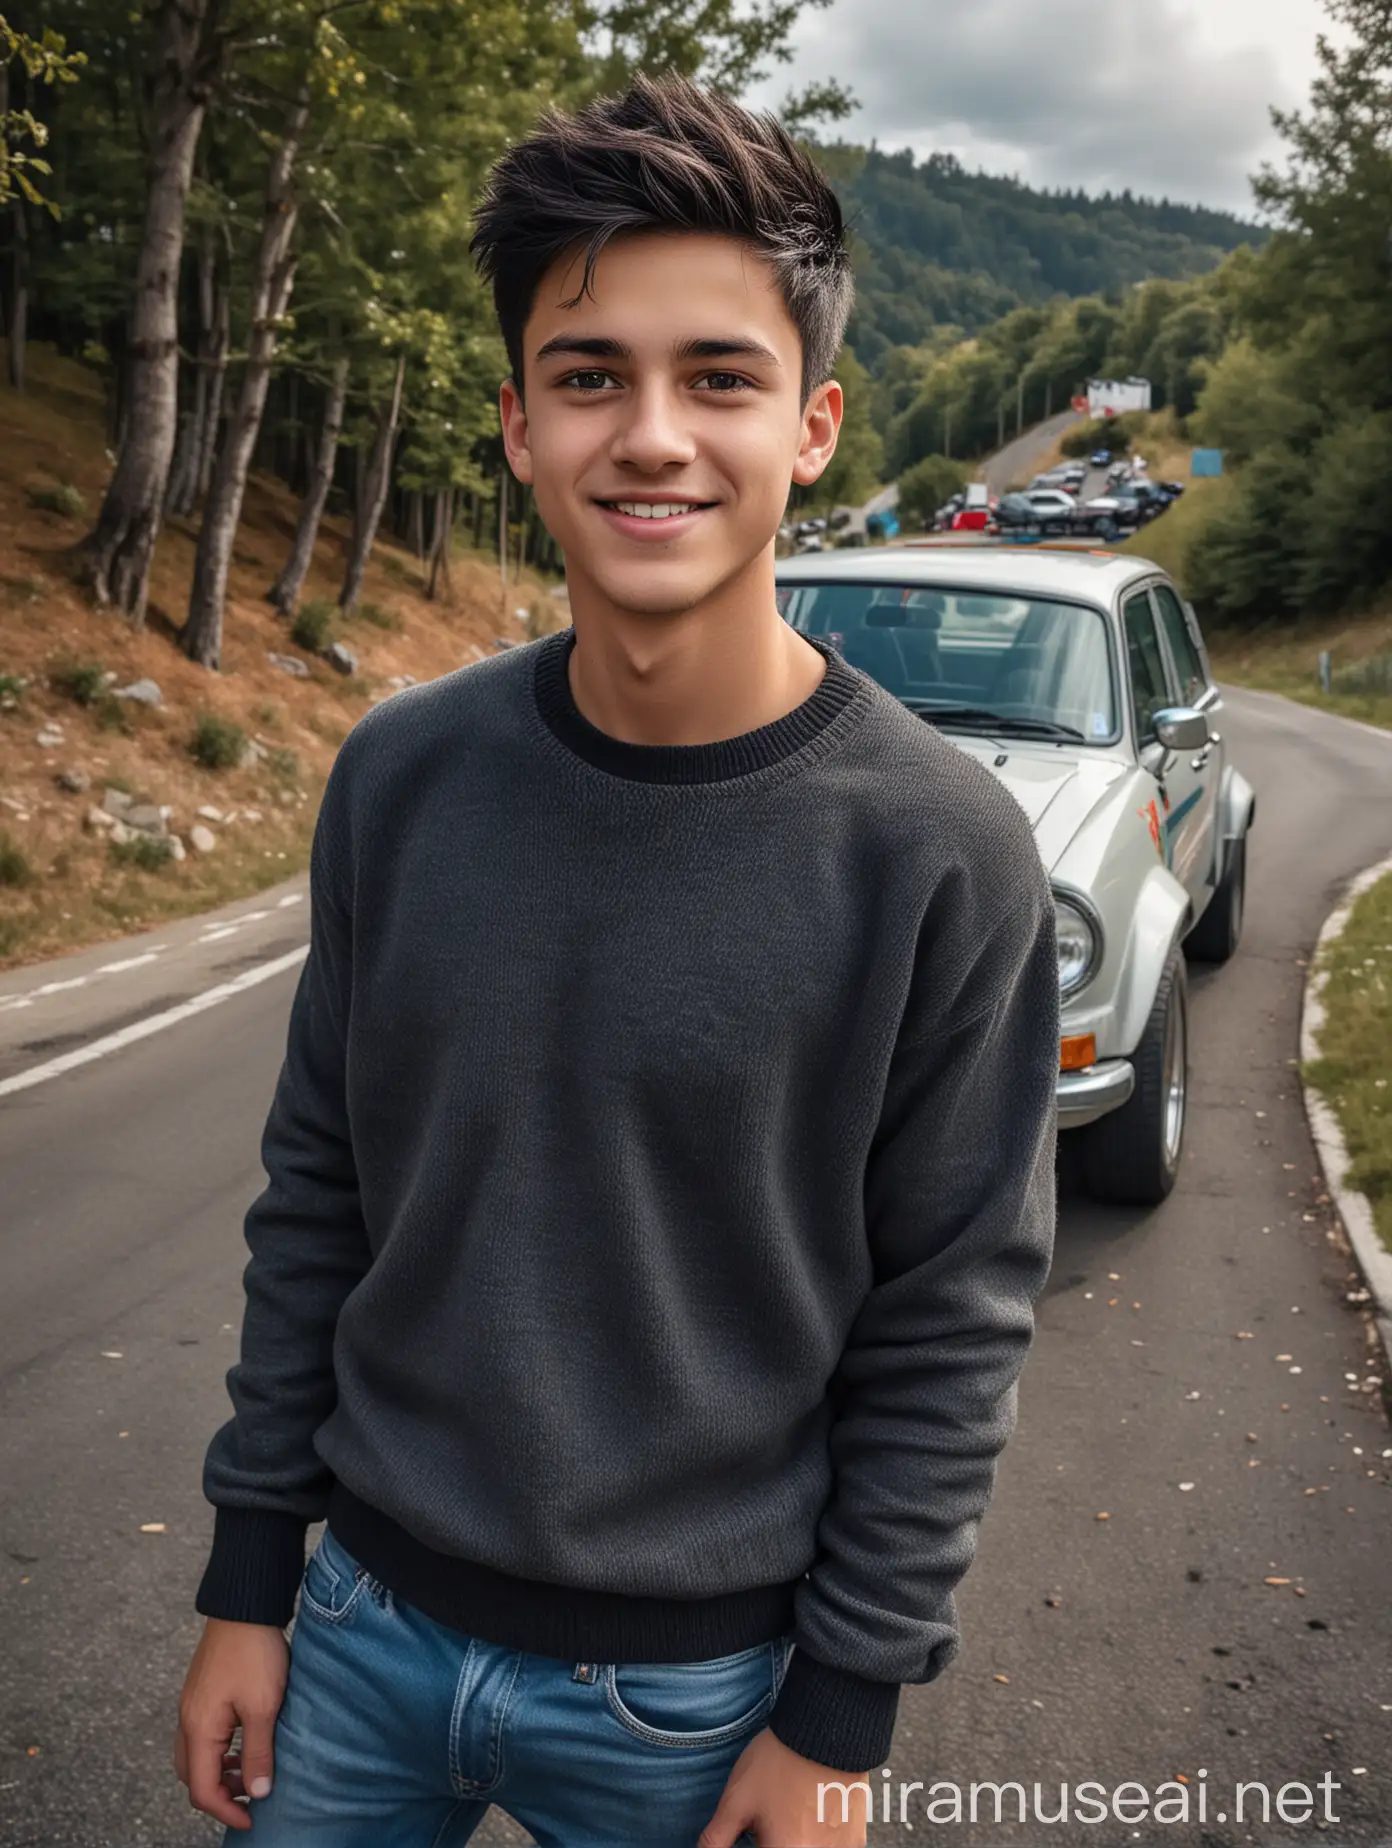 Handsome Young Man Smiling Next to Rally Car on Hilltop